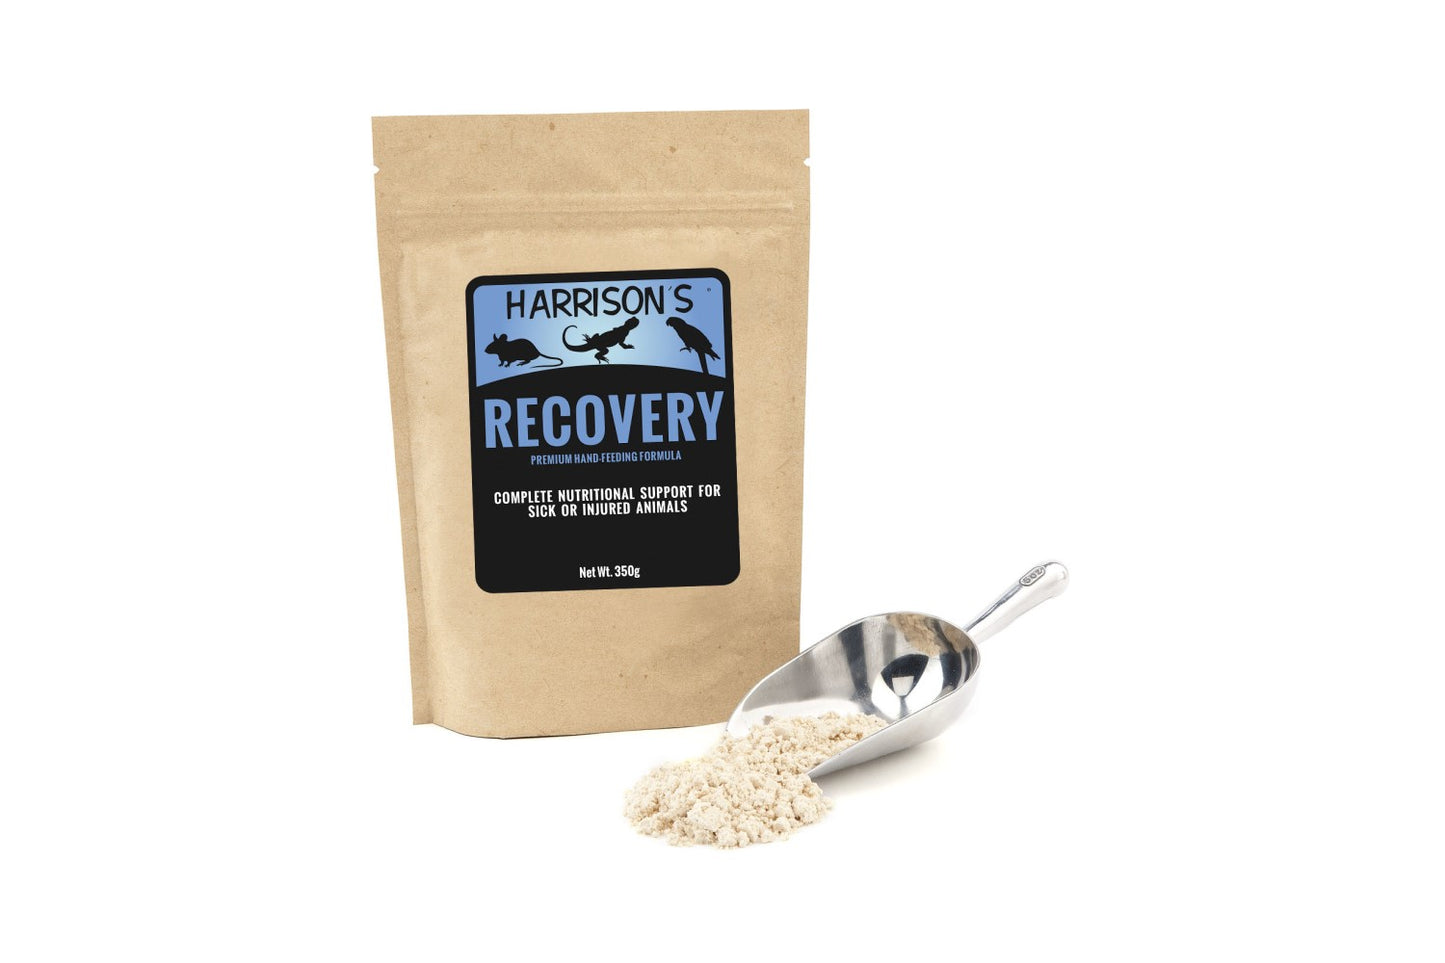 A 350g bag of Harrison's Recovery Formula, next to a metal scoop full of the formula